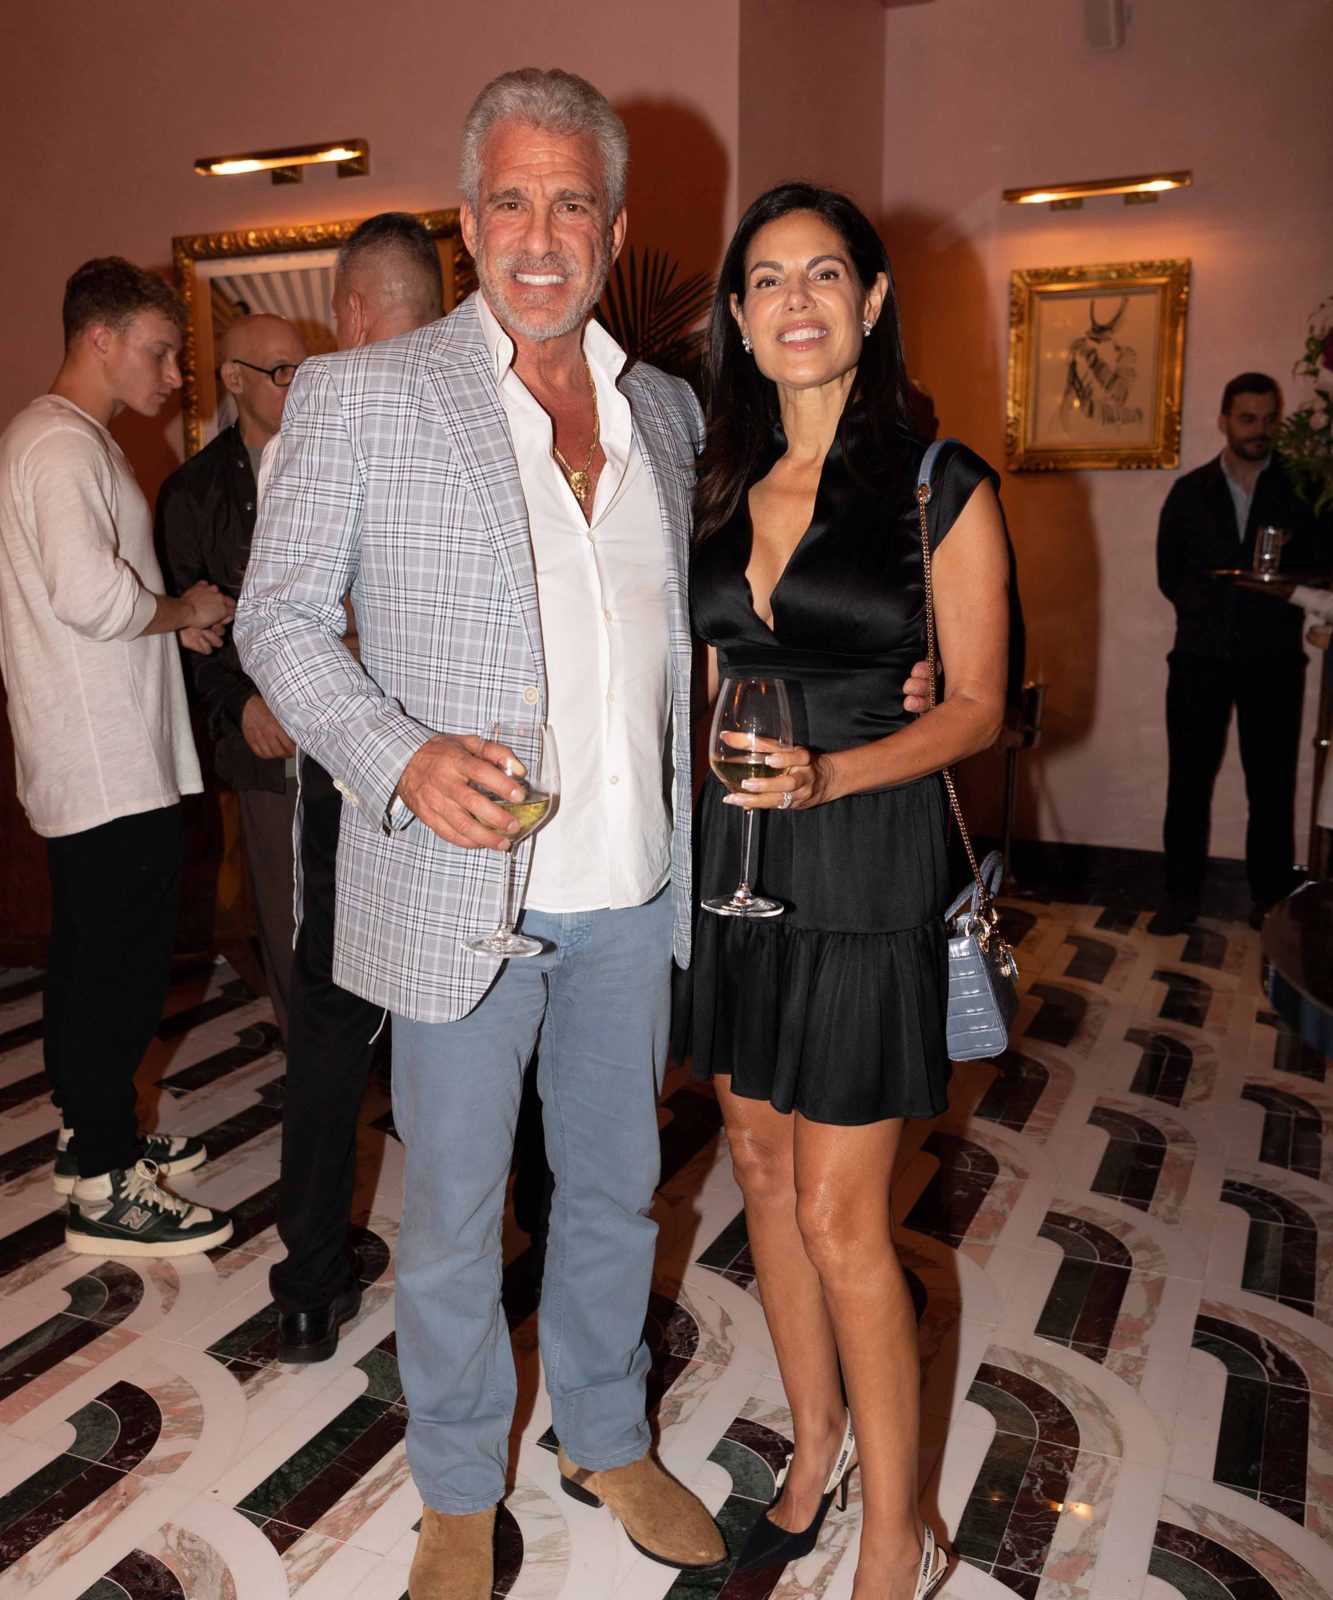 Major Food Group Hosts A Lavish Soiree Celebrating The Opening Of Contessa In Miami Design District